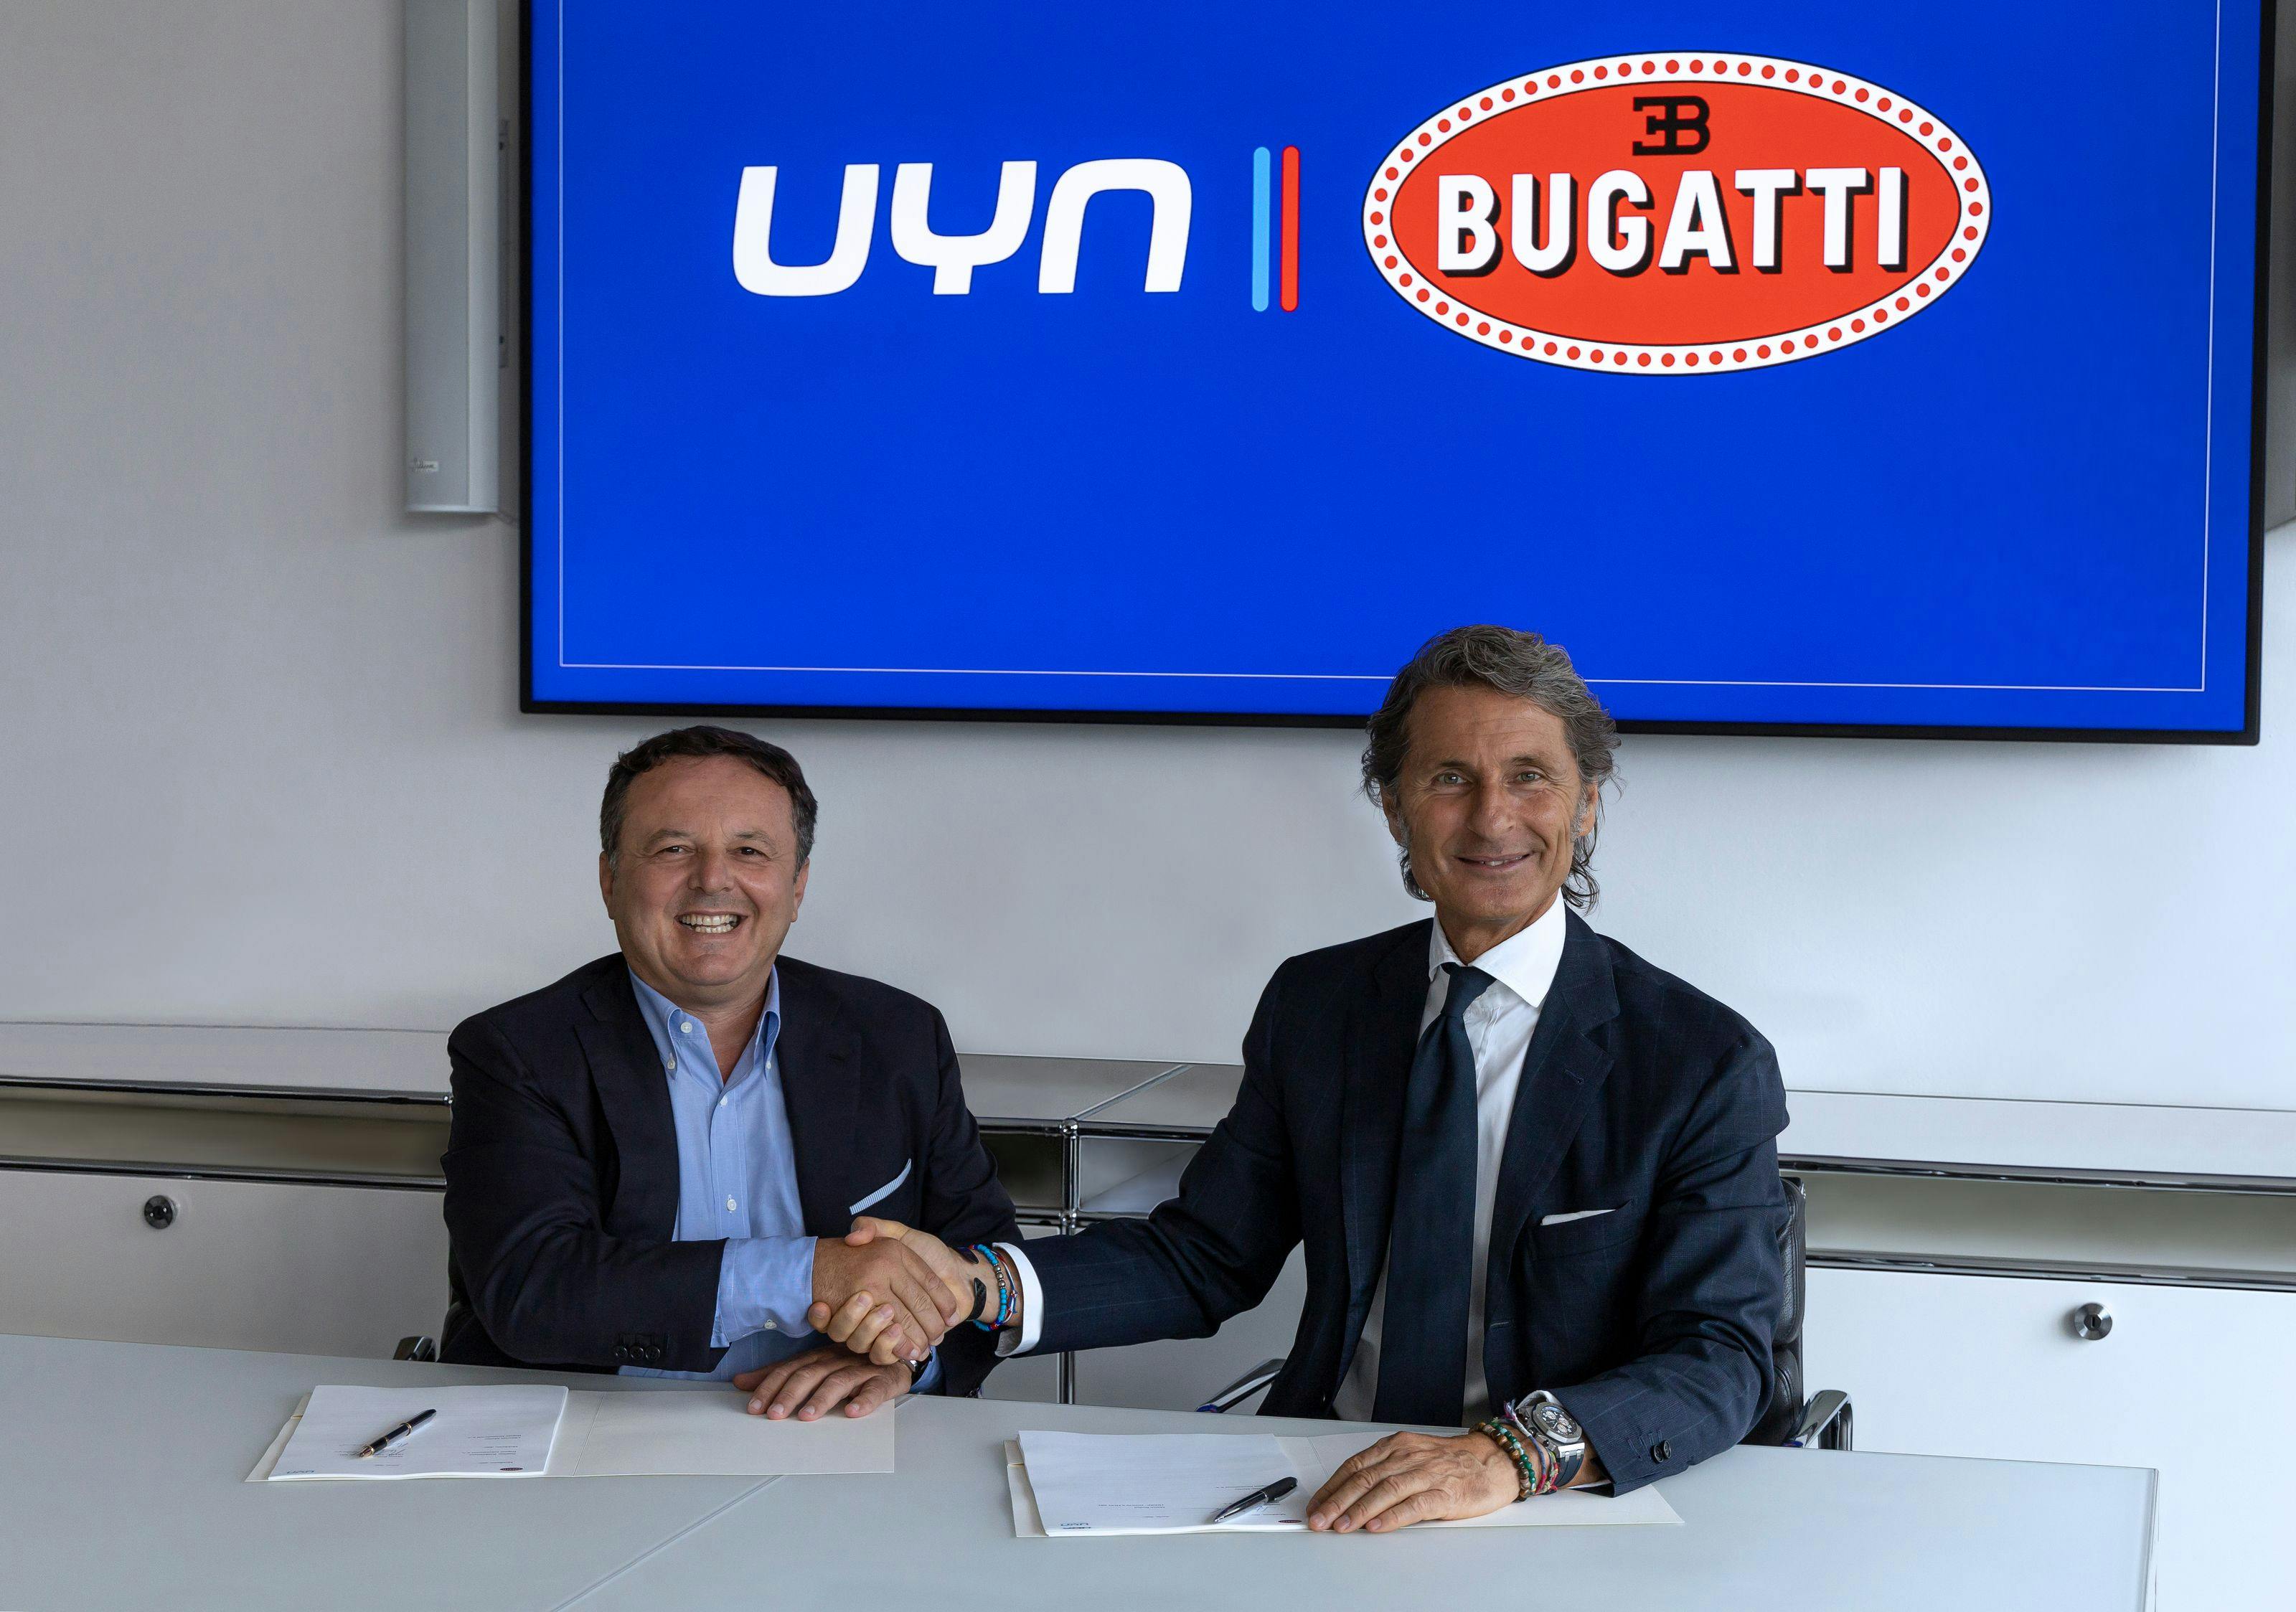 BUGATTI and UYN announce an exclusive collection to craft a line of high-performance apparel and shoes